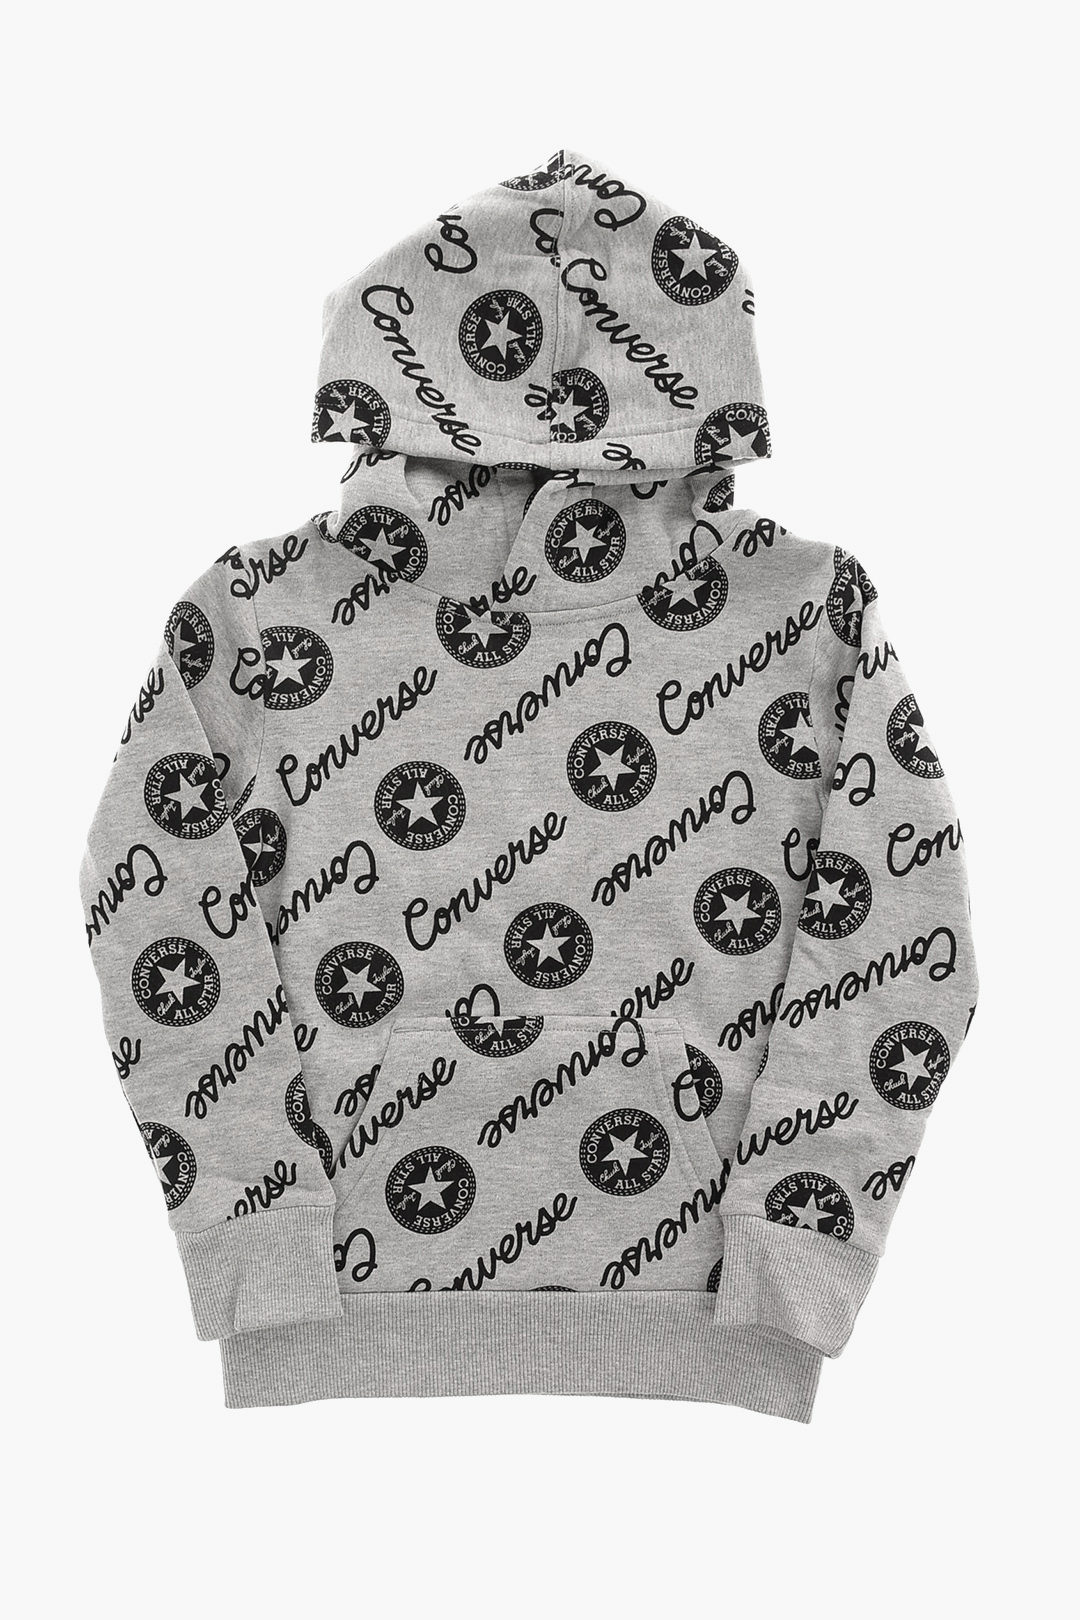 Logo KIDS Outlet Hood Over boys All - STAR with Sweatshirt ALL Converse Glamood